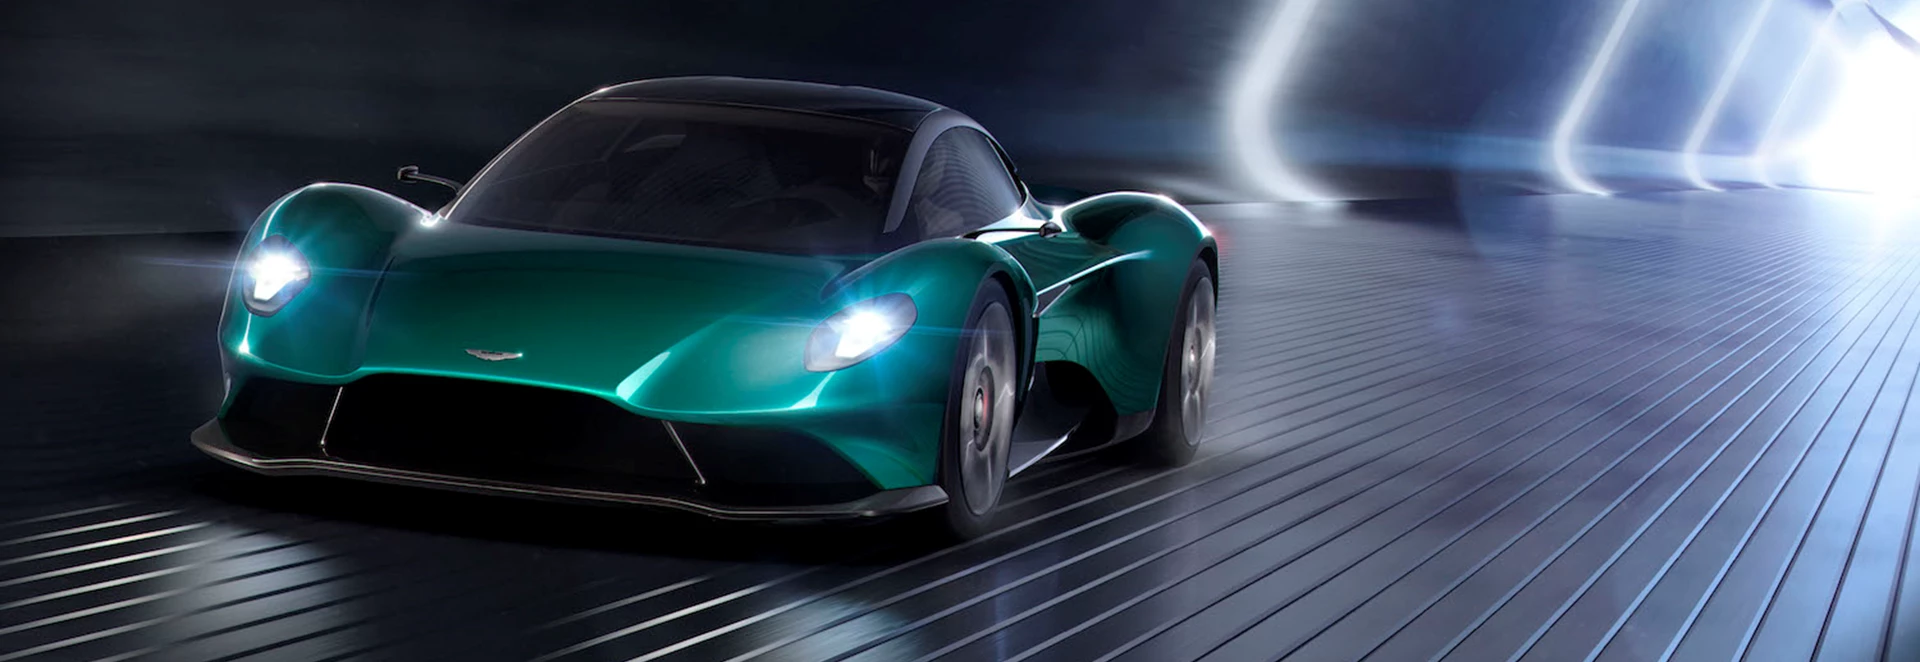 Aston Martin reveals first mid-engined production car